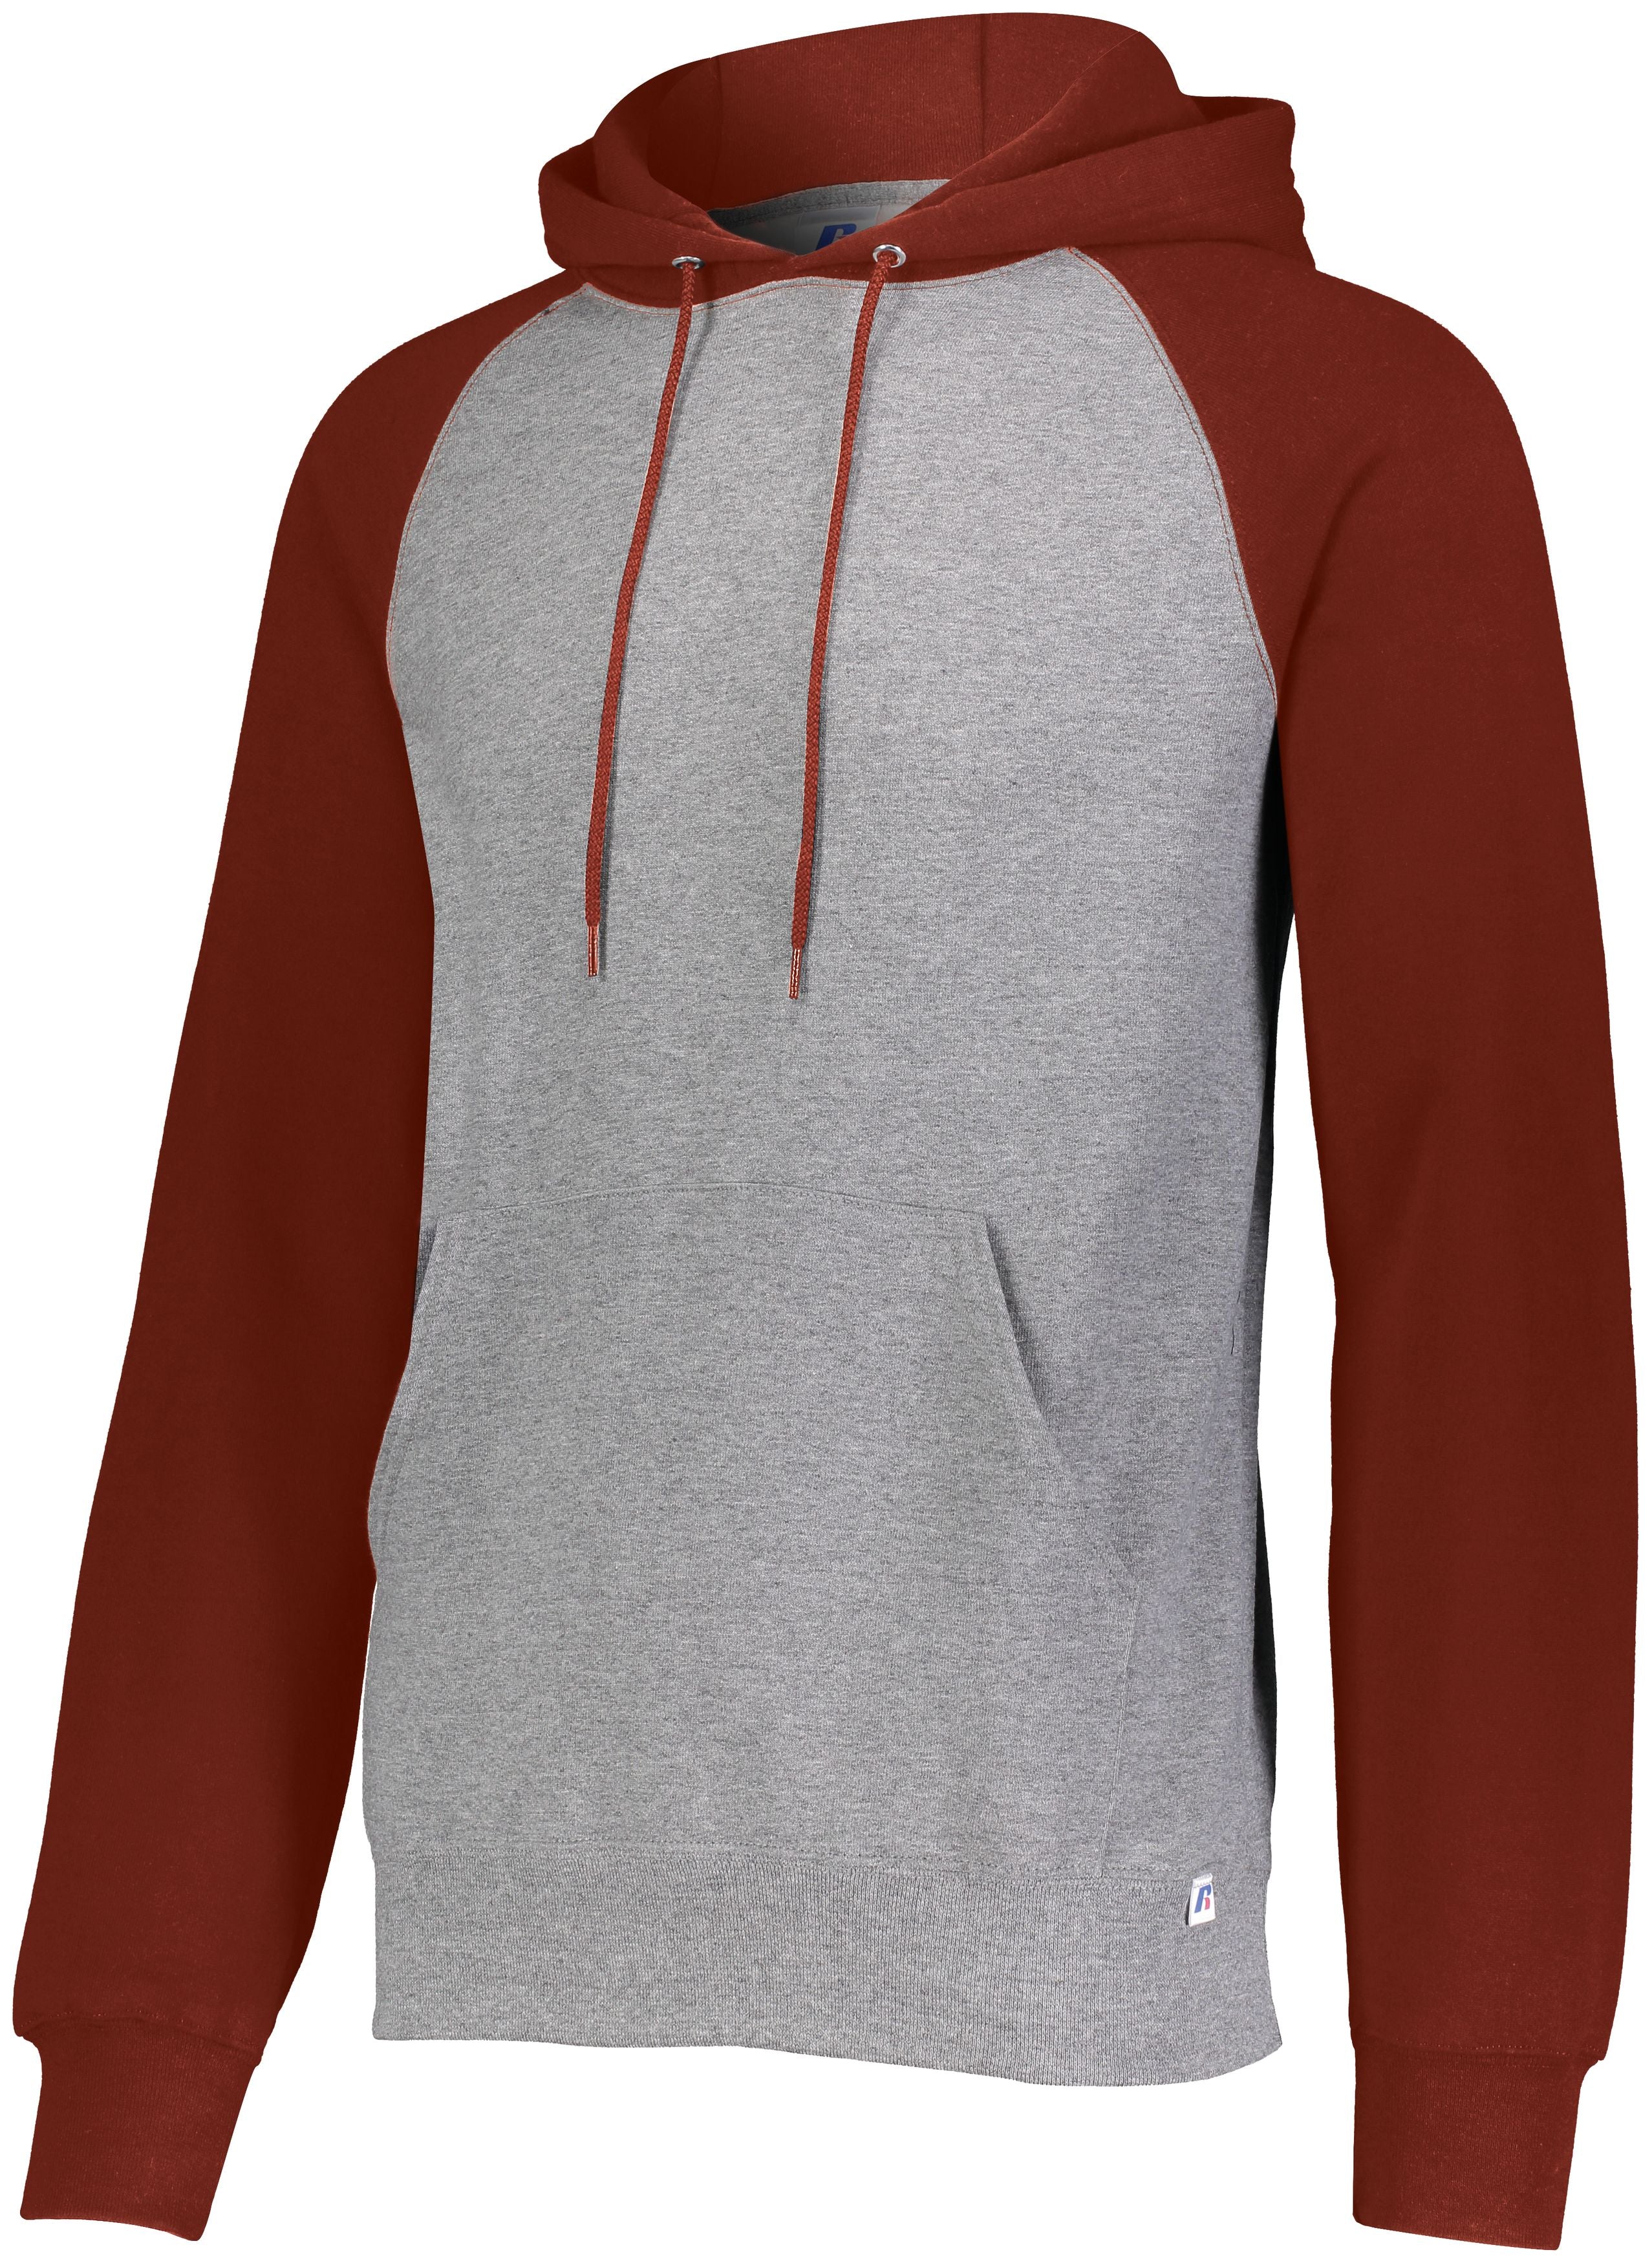 Russell Athletic Dri-Power  Fleece Colorblock Hoodie in Oxford/True Red  -Part of the Adult, Russell-Athletic-Products, Shirts product lines at KanaleyCreations.com